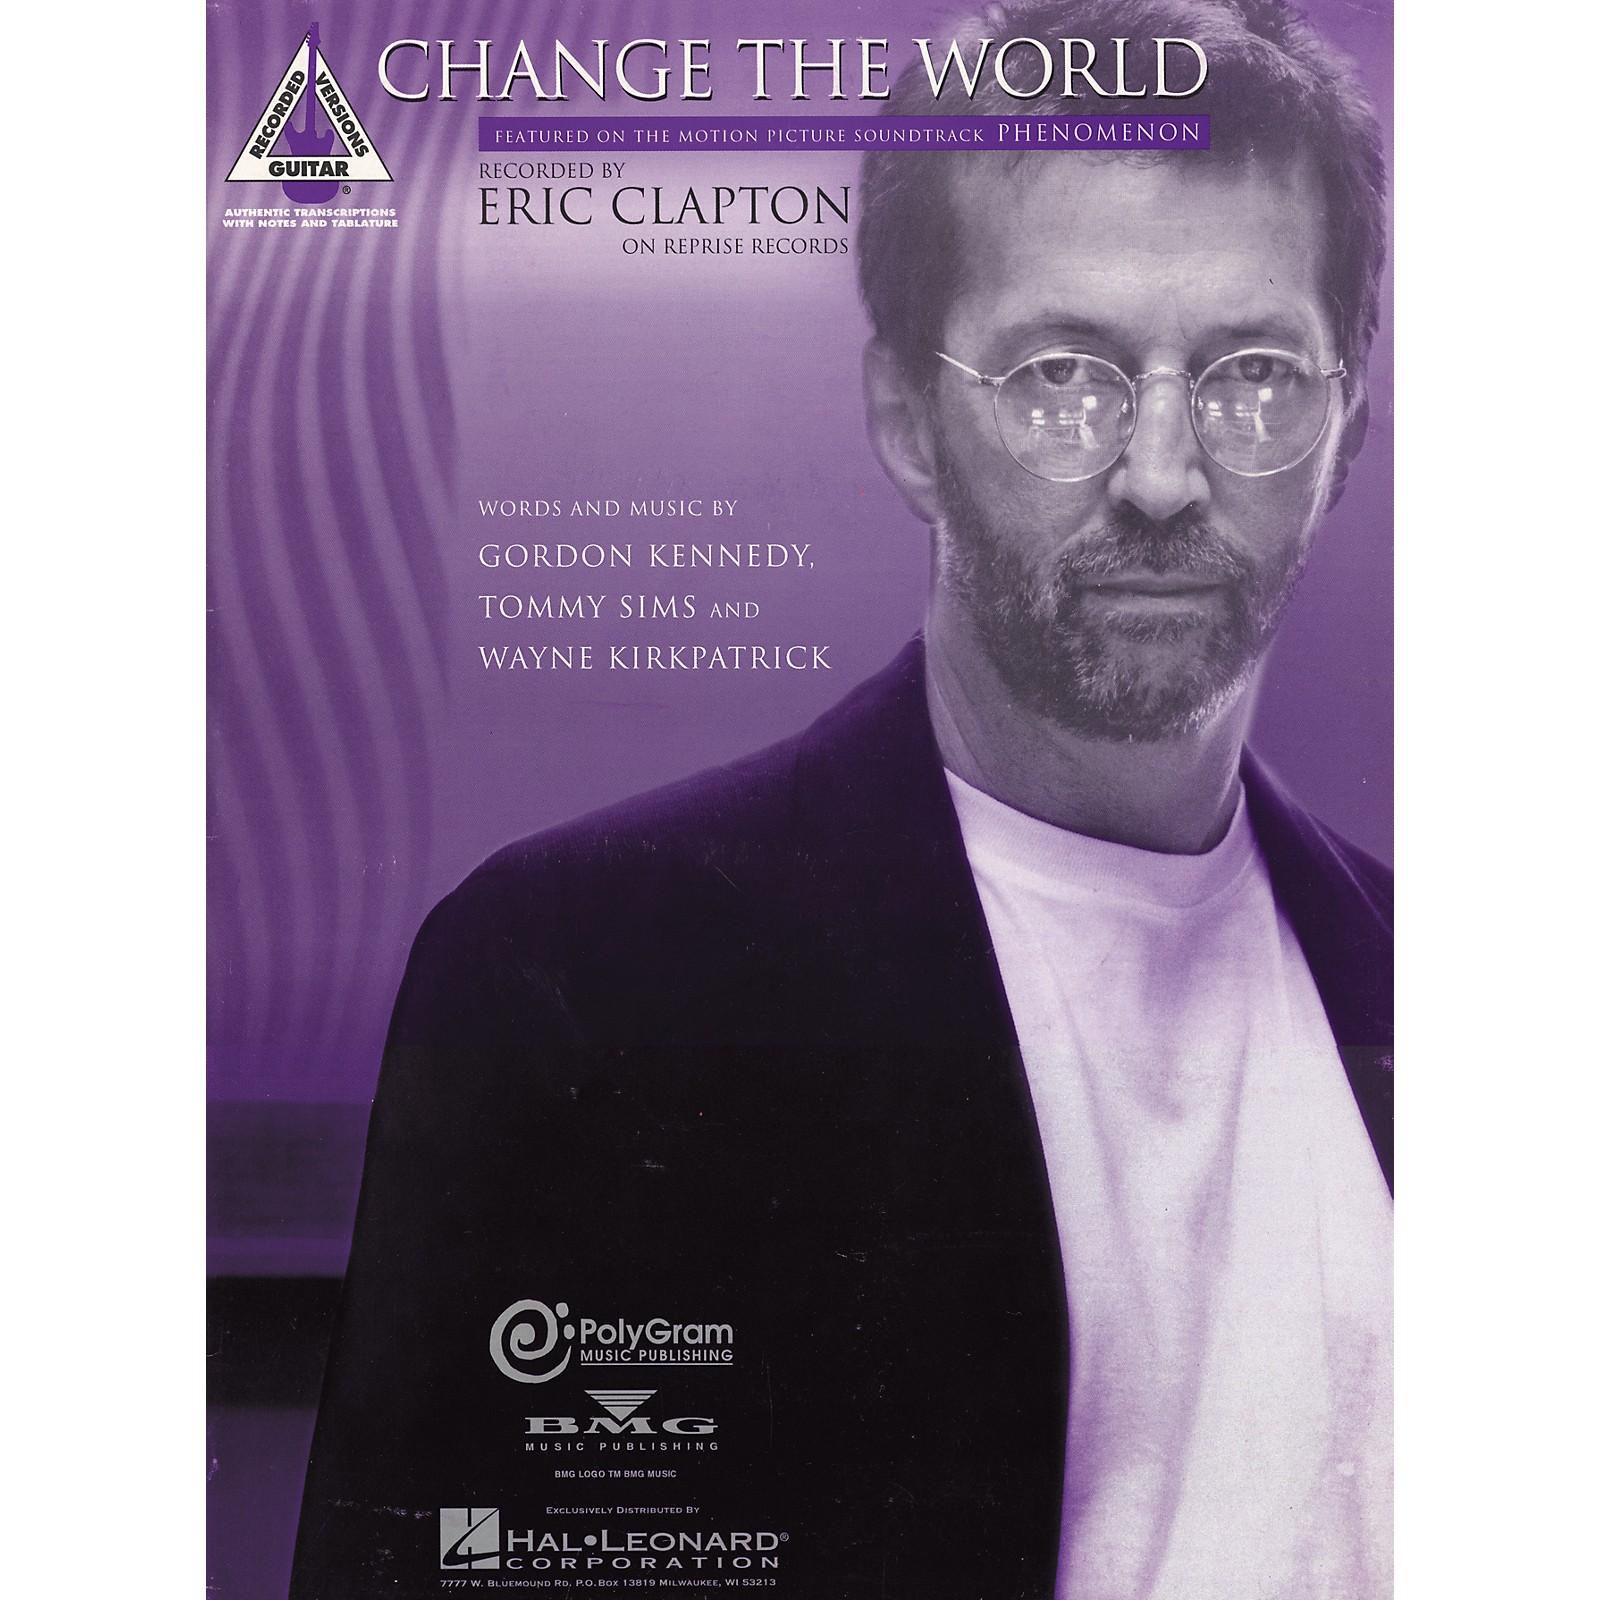 Change the world eric clapton download torrent alvin and the chipmunks dvdrip torrent download